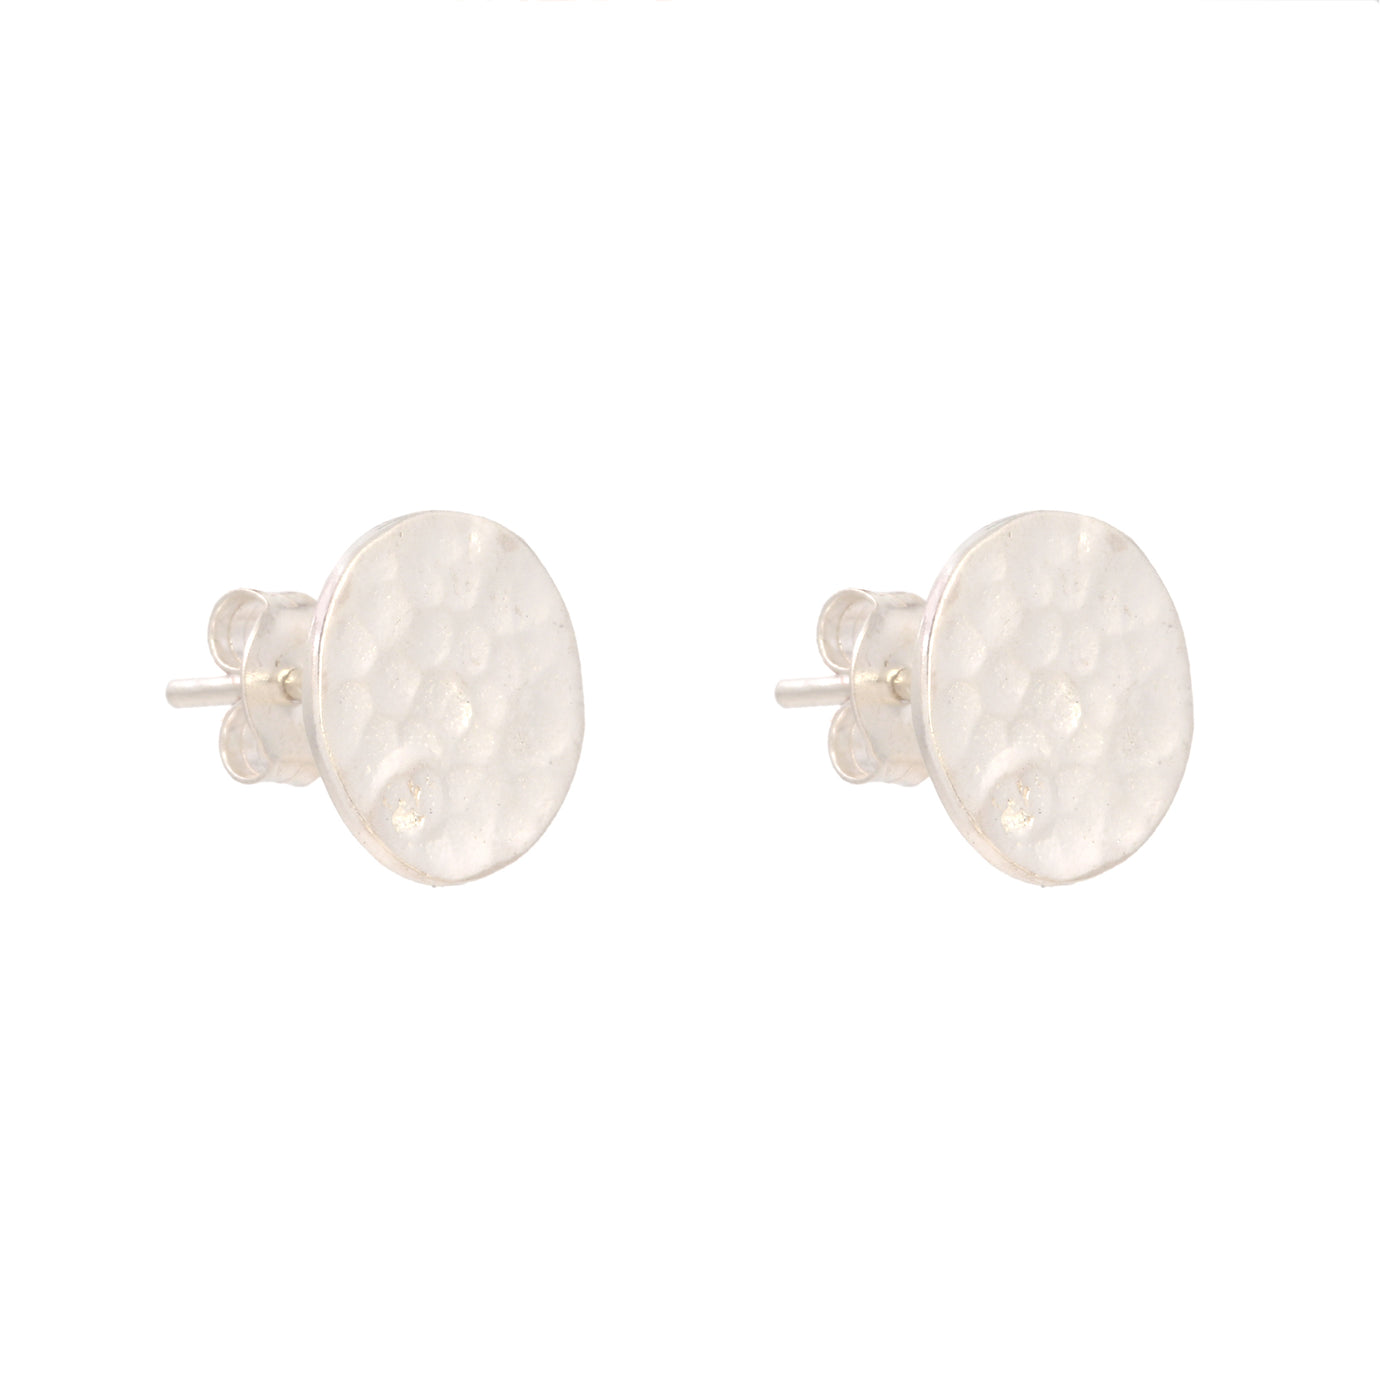 Nimi hammered studs handcrafted